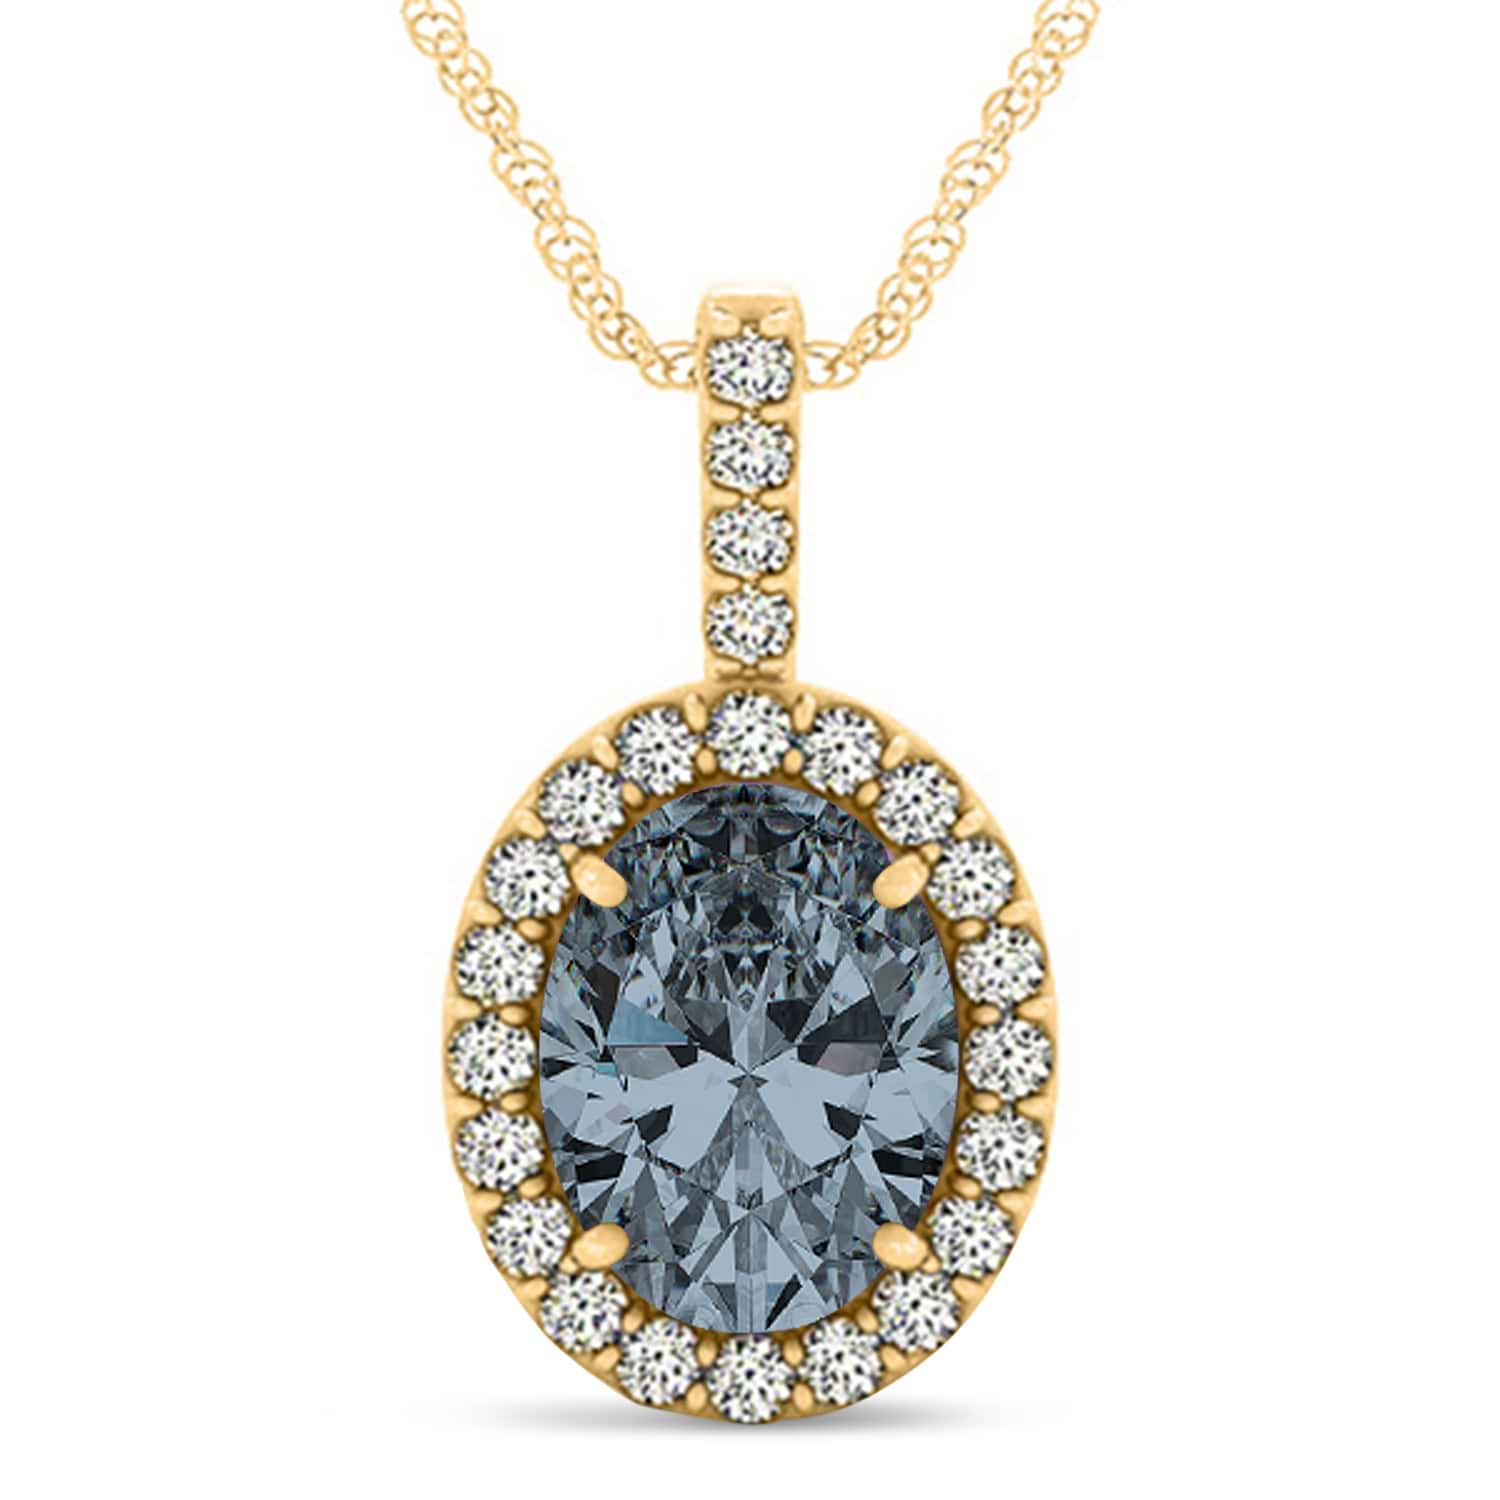 Gray Spinel & Diamond Halo Oval Pendant Necklace 14k Yellow Gold (1.02ct)